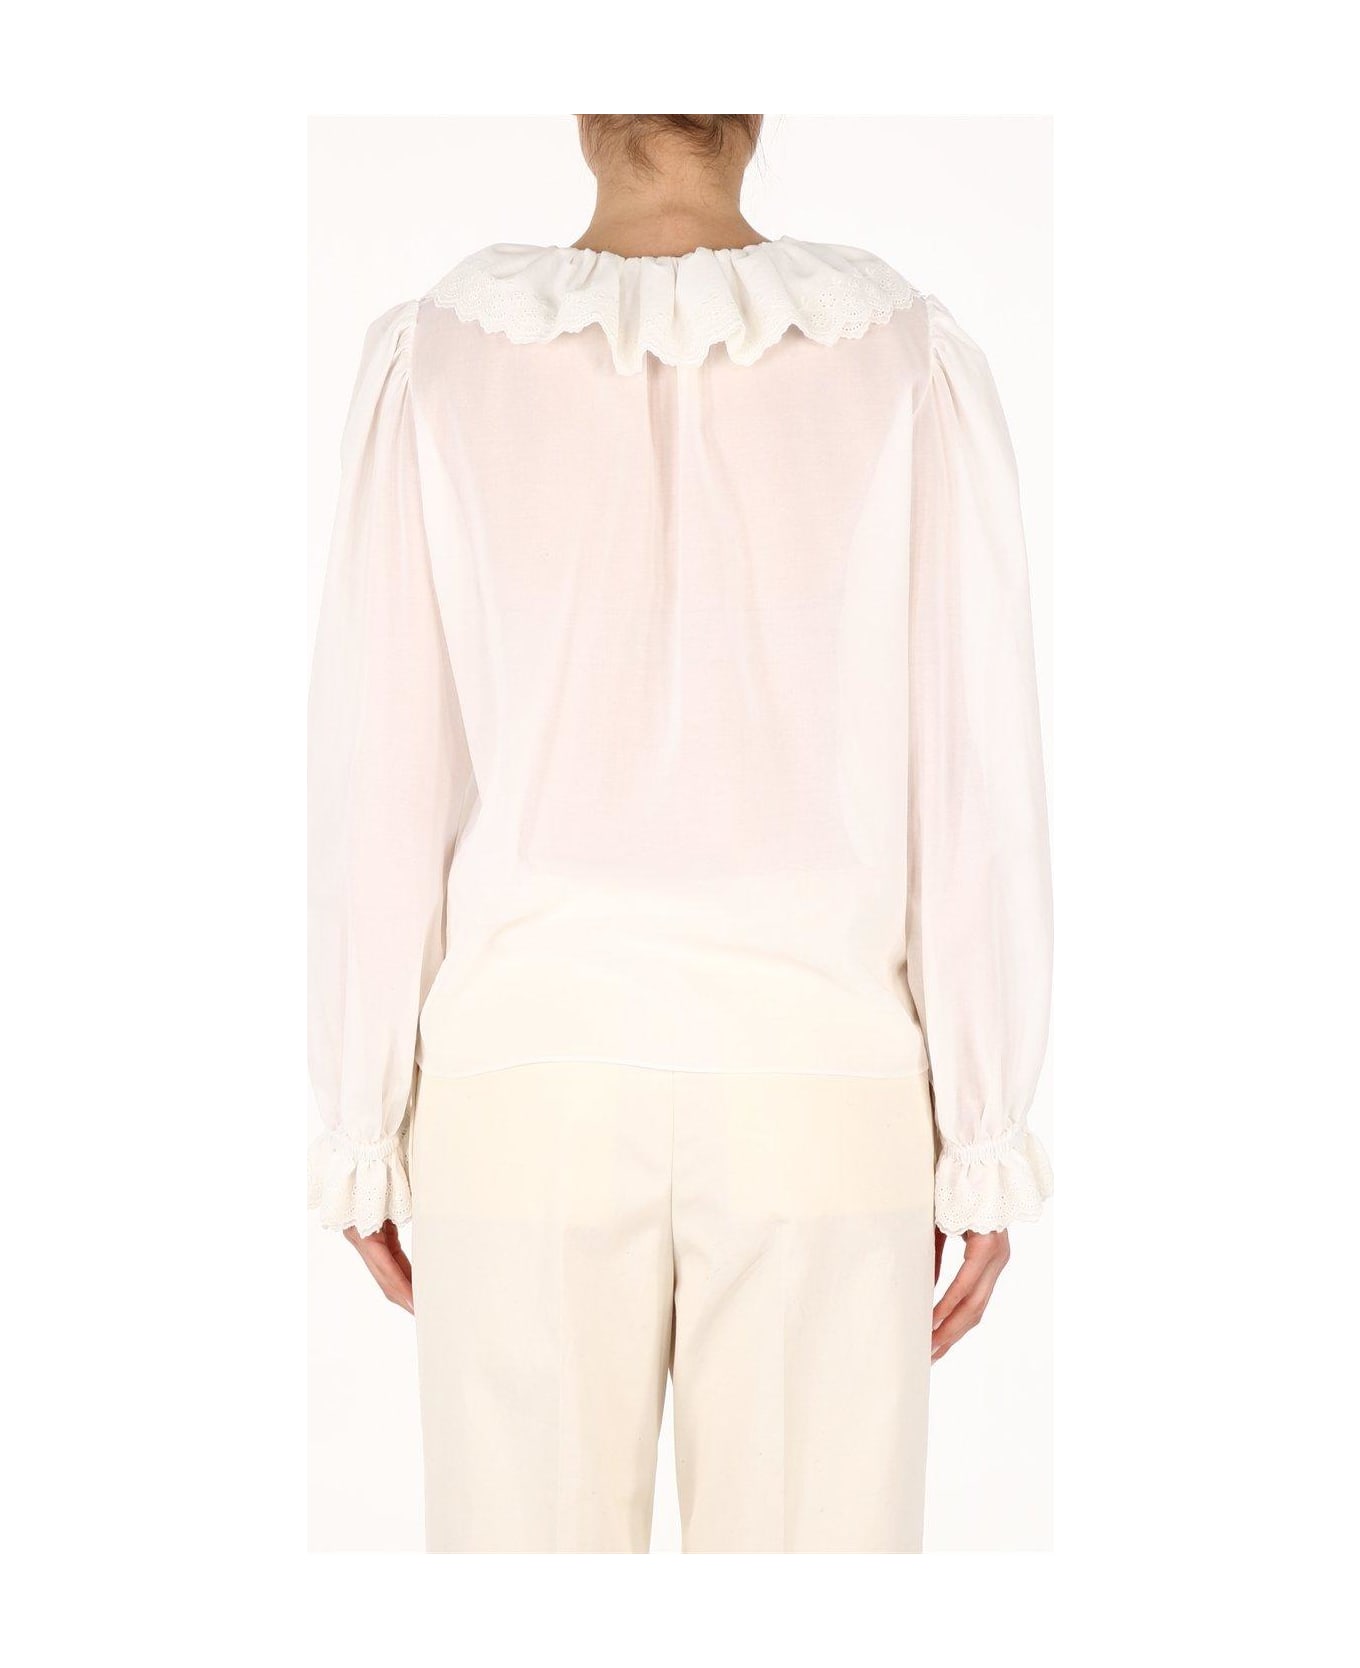 Saint Laurent Broderie Anglaise Frilled Tie Blouse - White